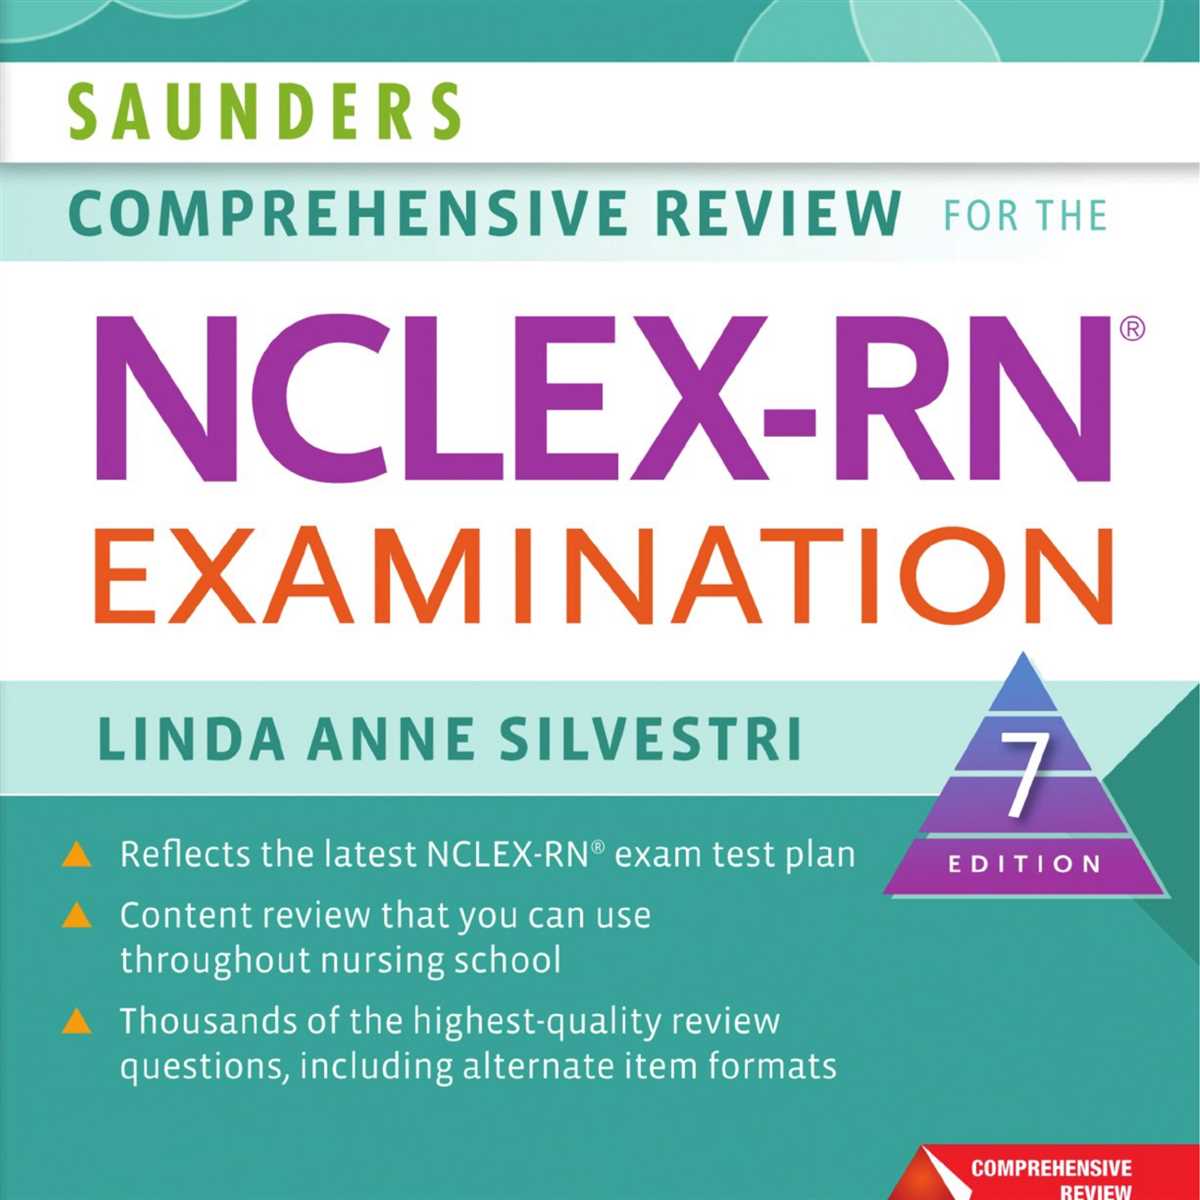 Benefits of Using Saunders NCLEX RN Questions and Answers